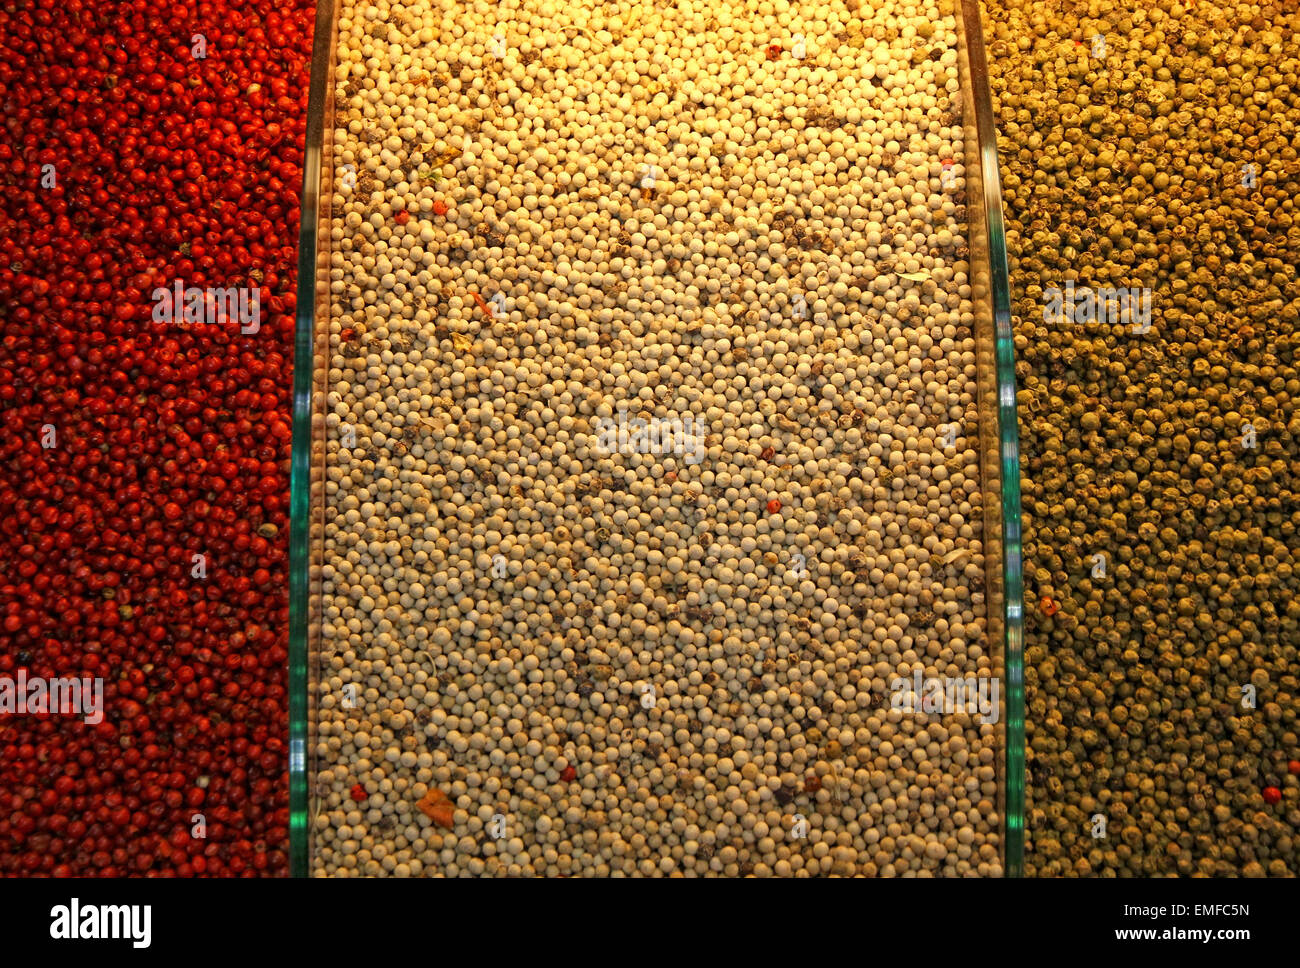 Piles of red, white and green pepper on a spice market in Istanbul, Turkey Stock Photo